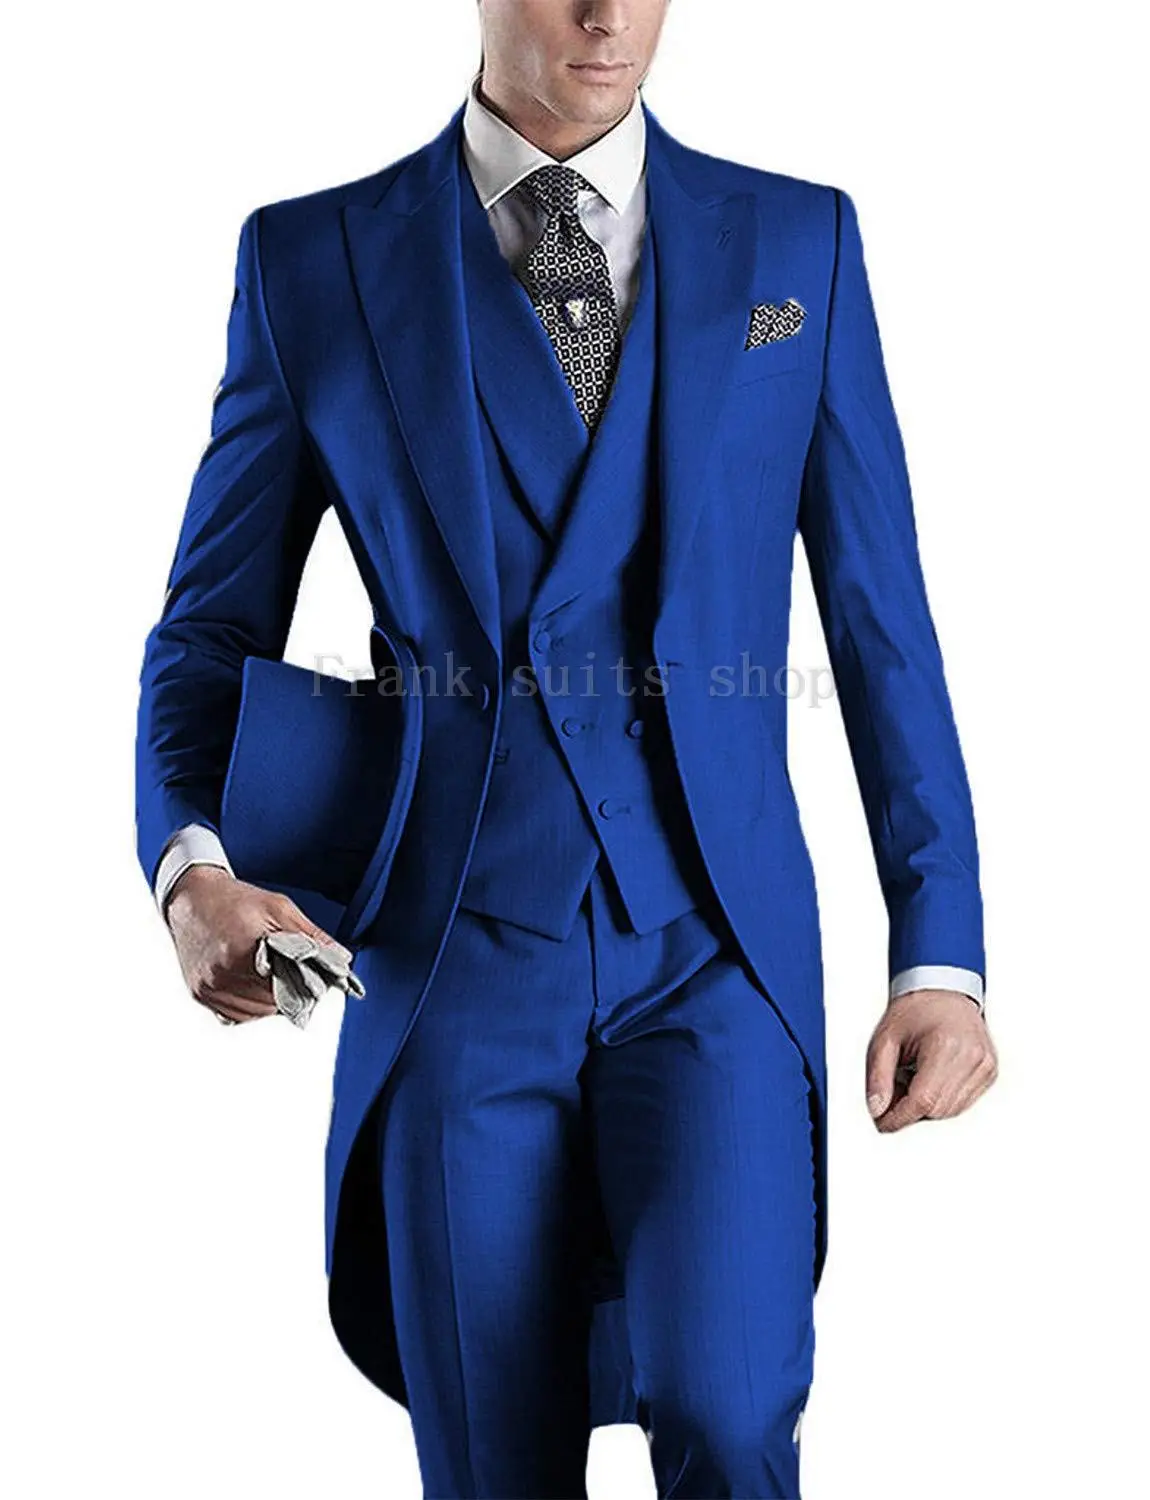 Royal Blue Single Breasted vest Long tail coat Wedding Suits for Men Peaked Lapel Mens Suit Evening Party Gentlemen Tuxedos